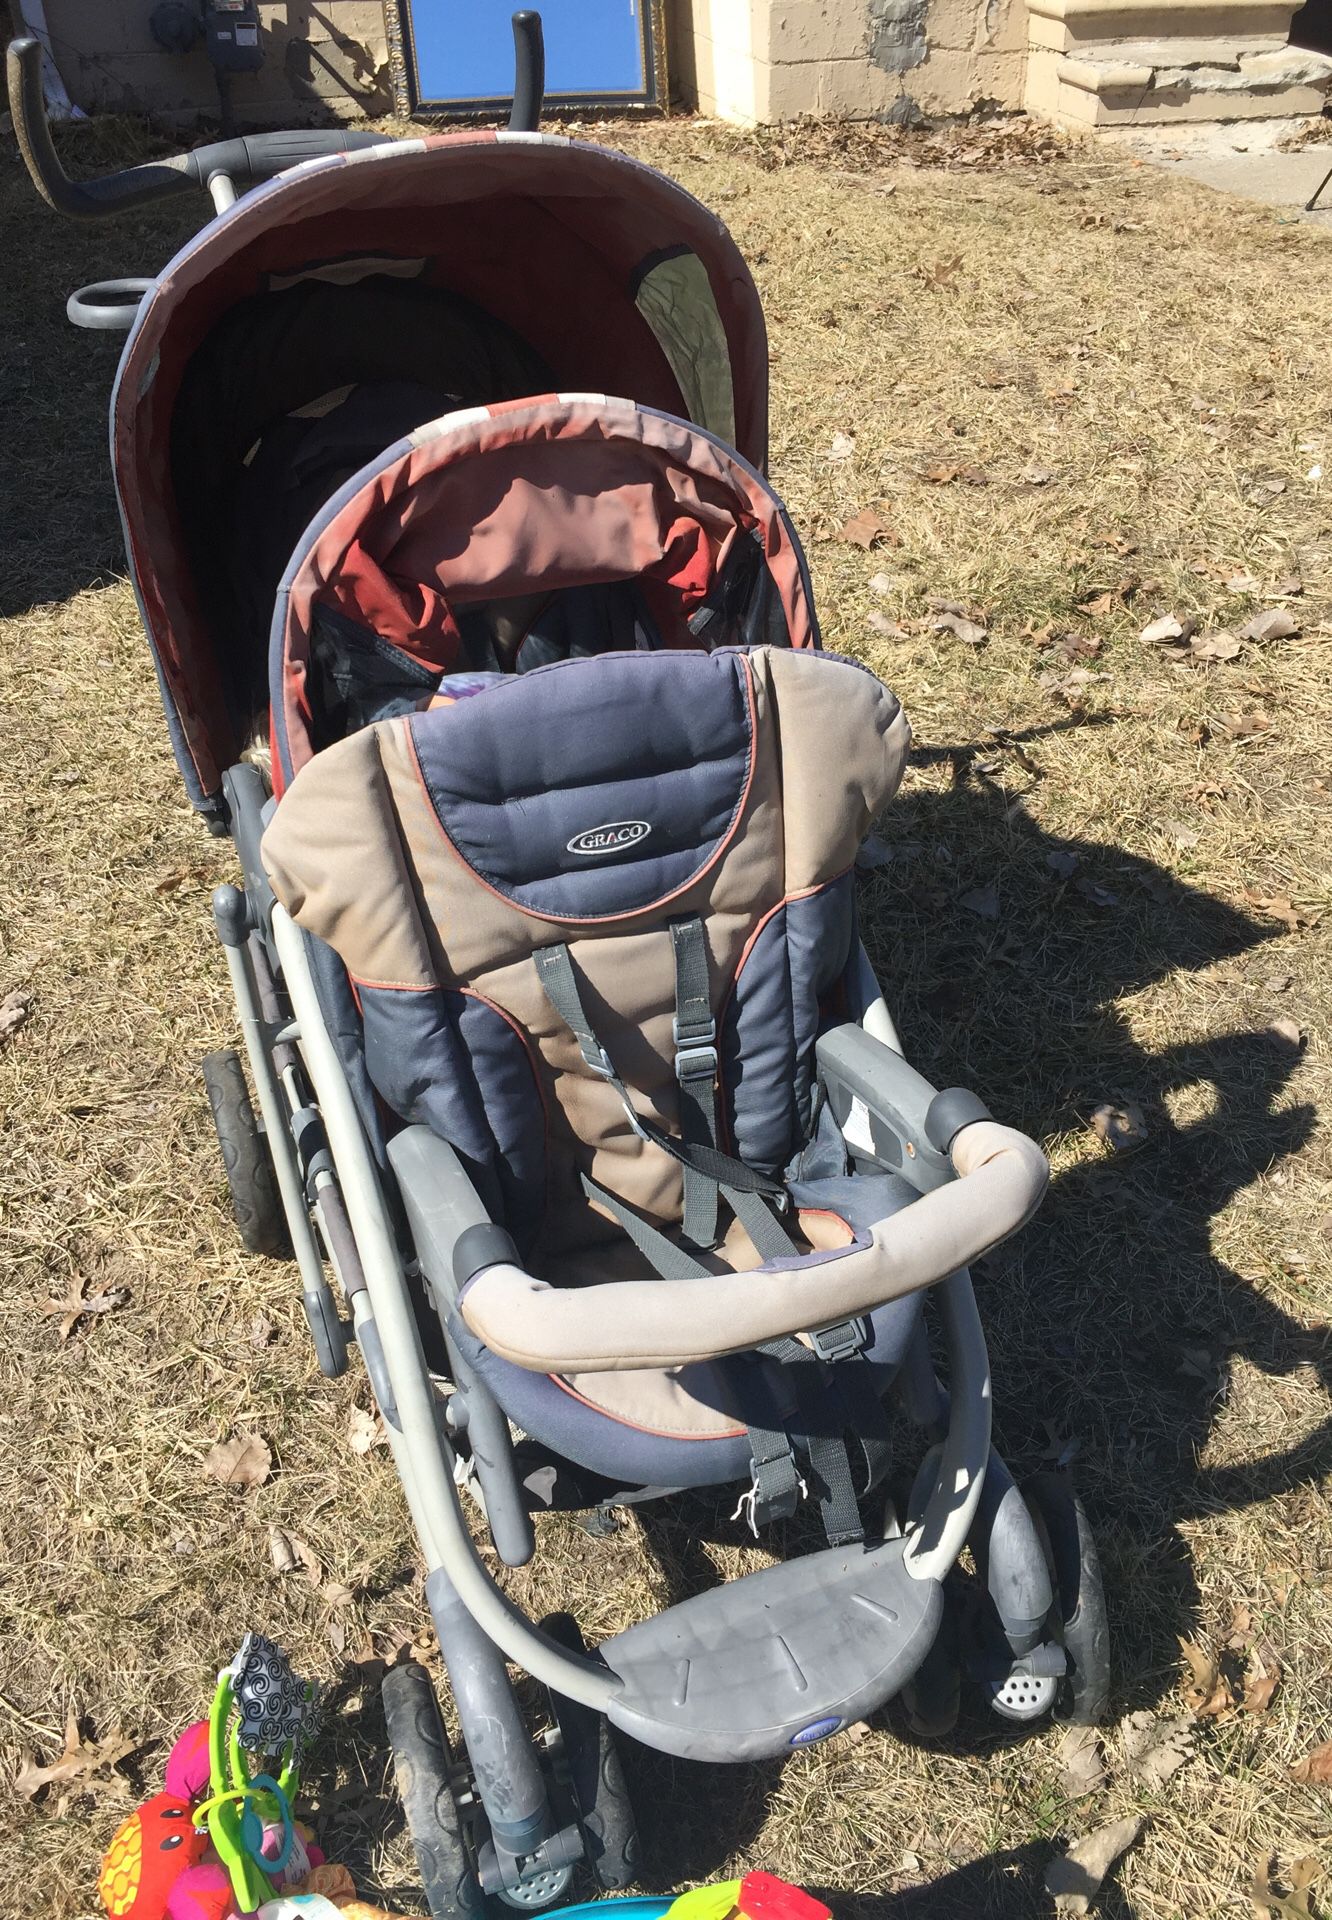 Double seat baby stroller ok condition